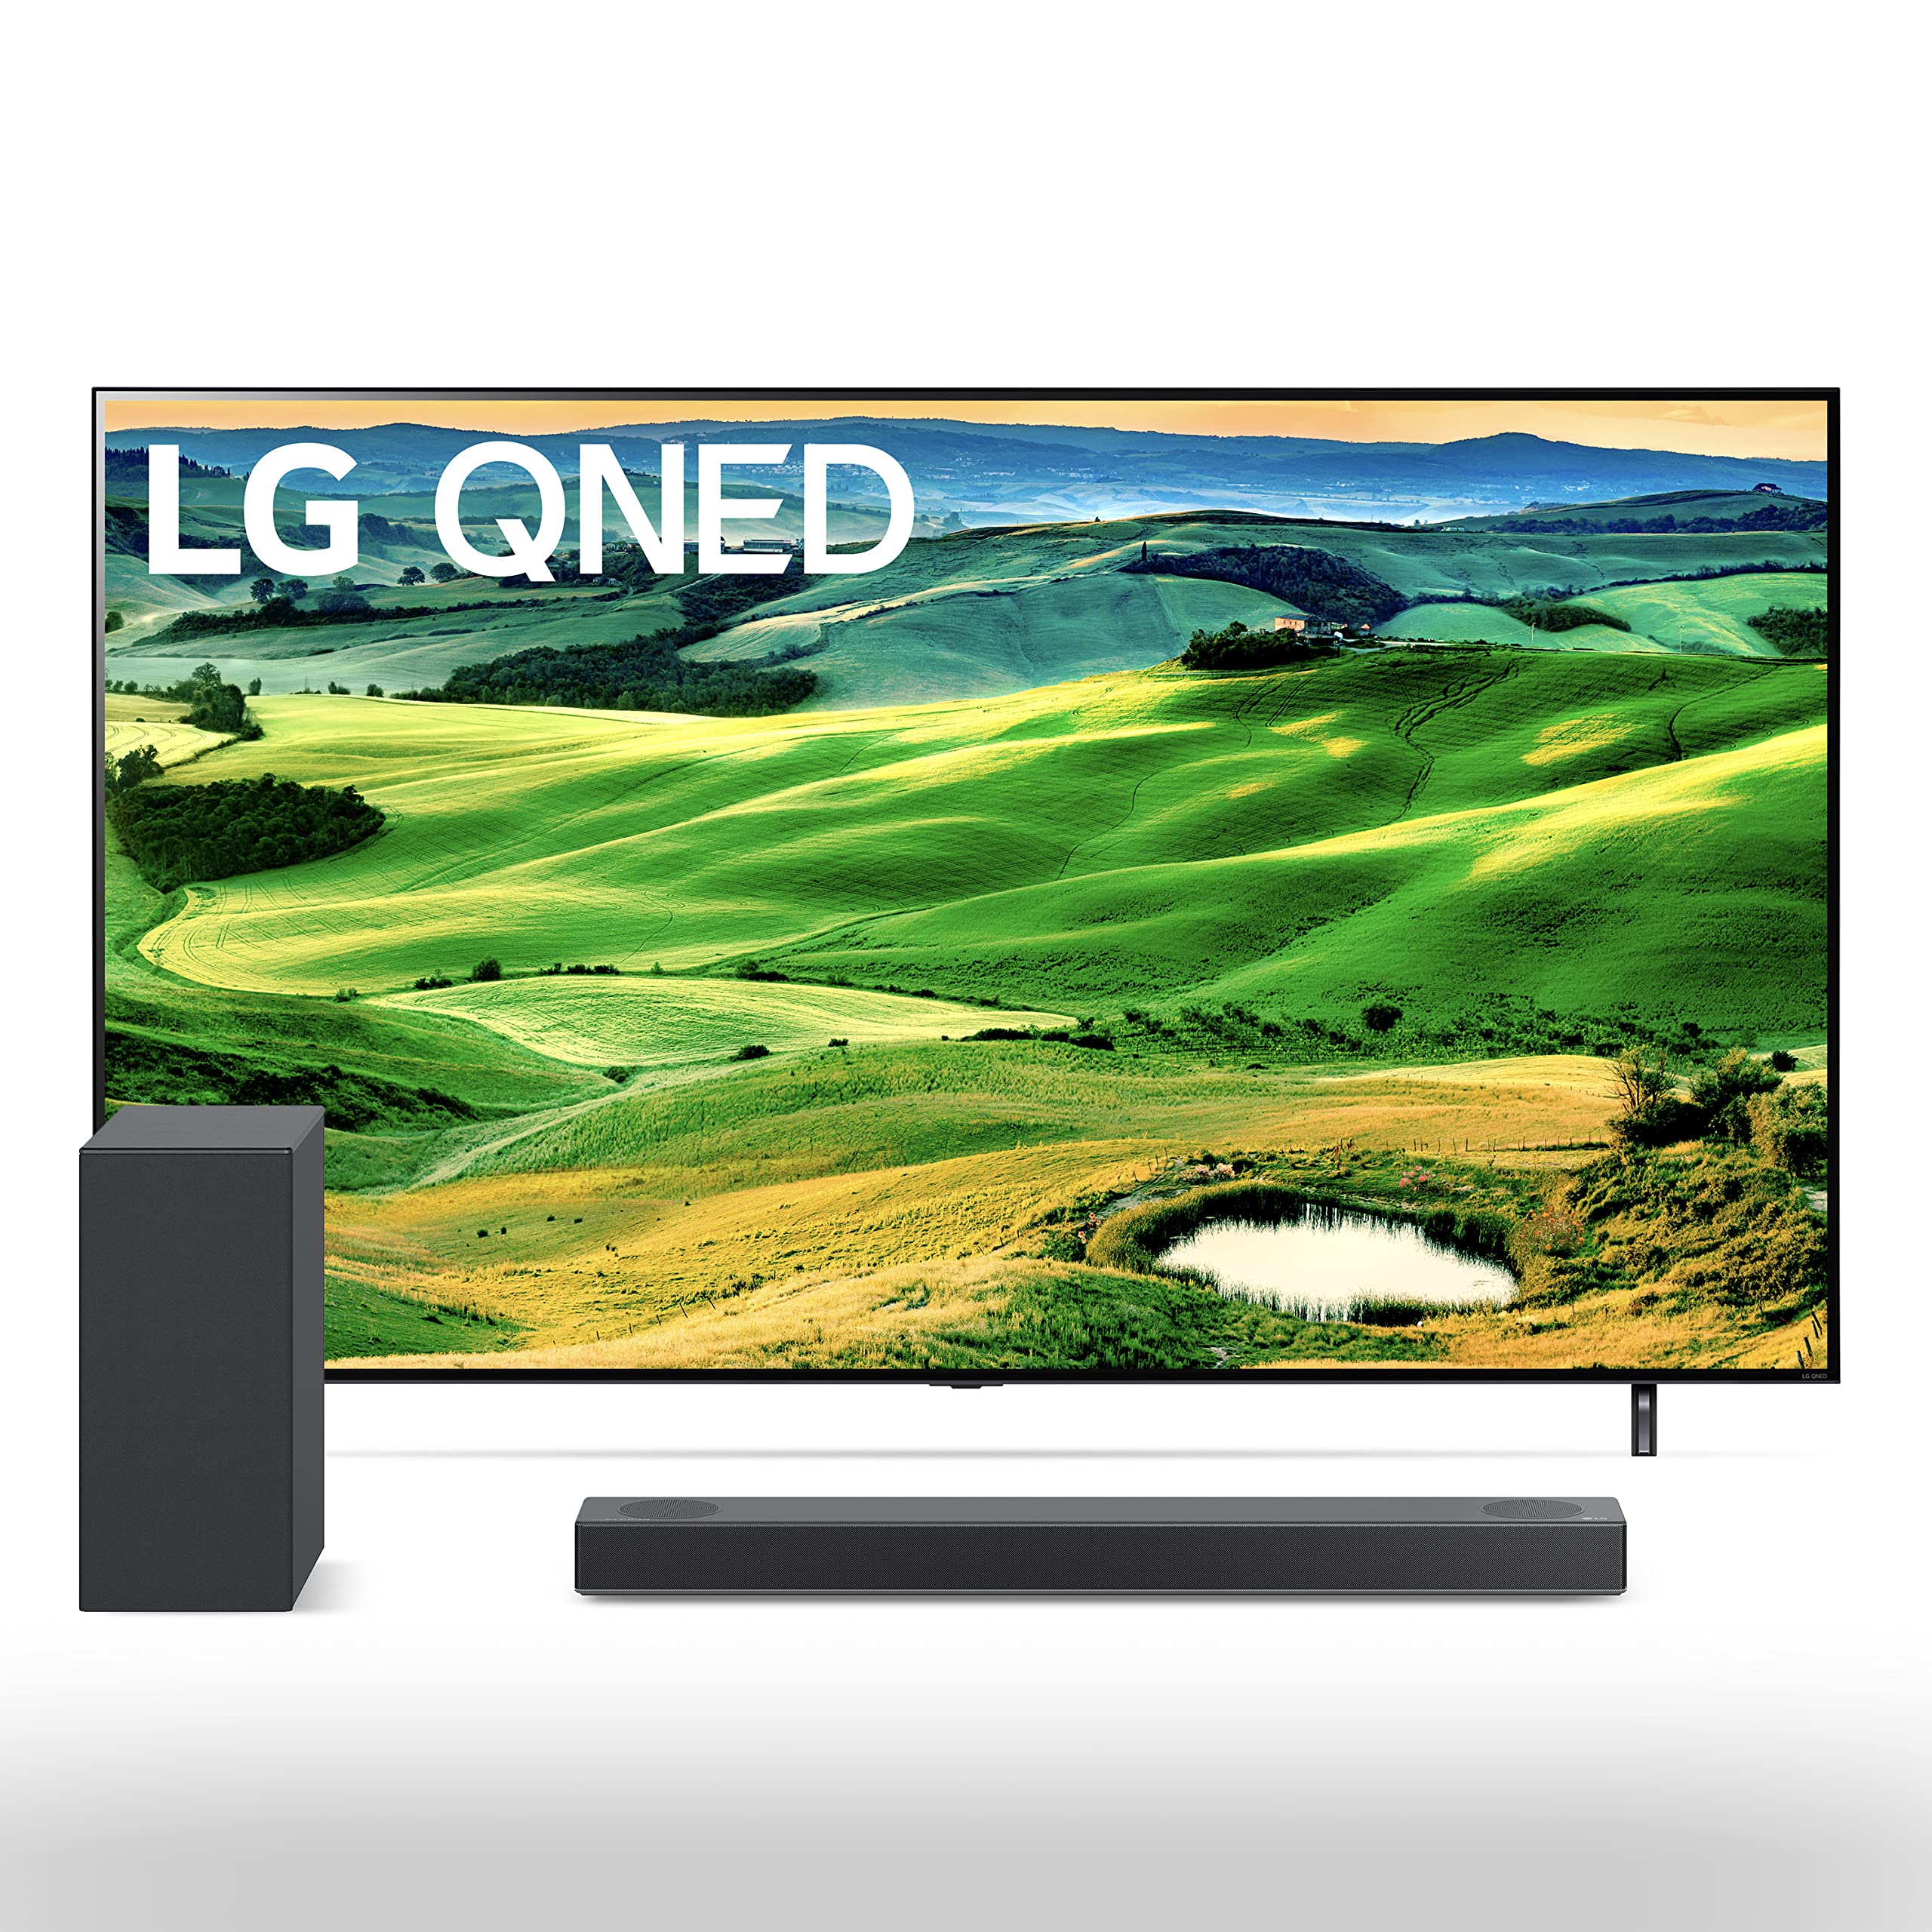 LG 75-inch Class QNED80 Series 4K Smart TV with Alexa Built-in 75QNED80UQA S75Q 3.1.2ch Sound bar w/Dolby Atmos DTS:X, Hi-Res Audio, Meridian, HDMI eARC, 4K Pass Thru w/Dolby Vision